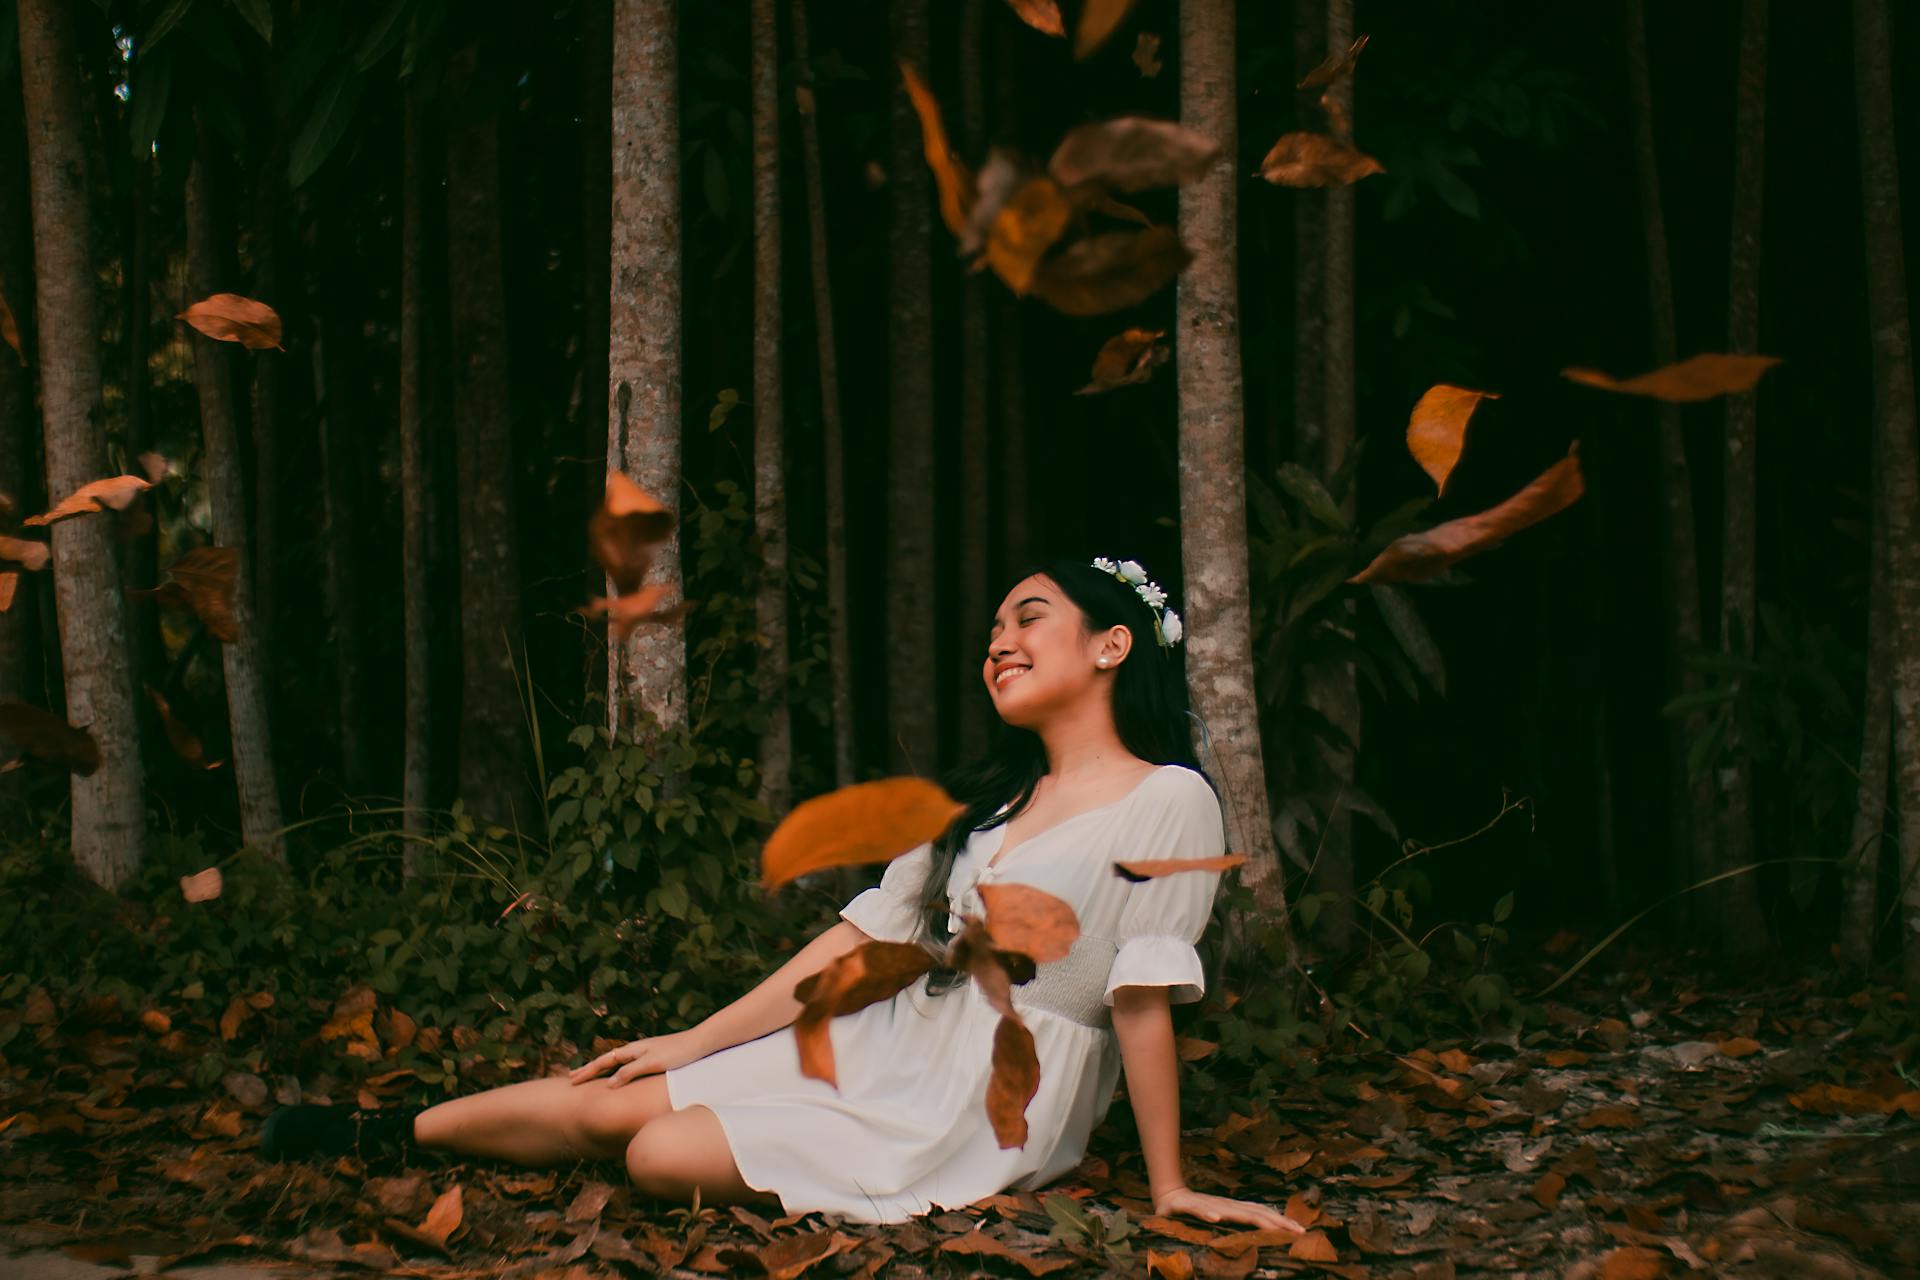 Woman in White Dress Sitting on Ground While Leaves Fall